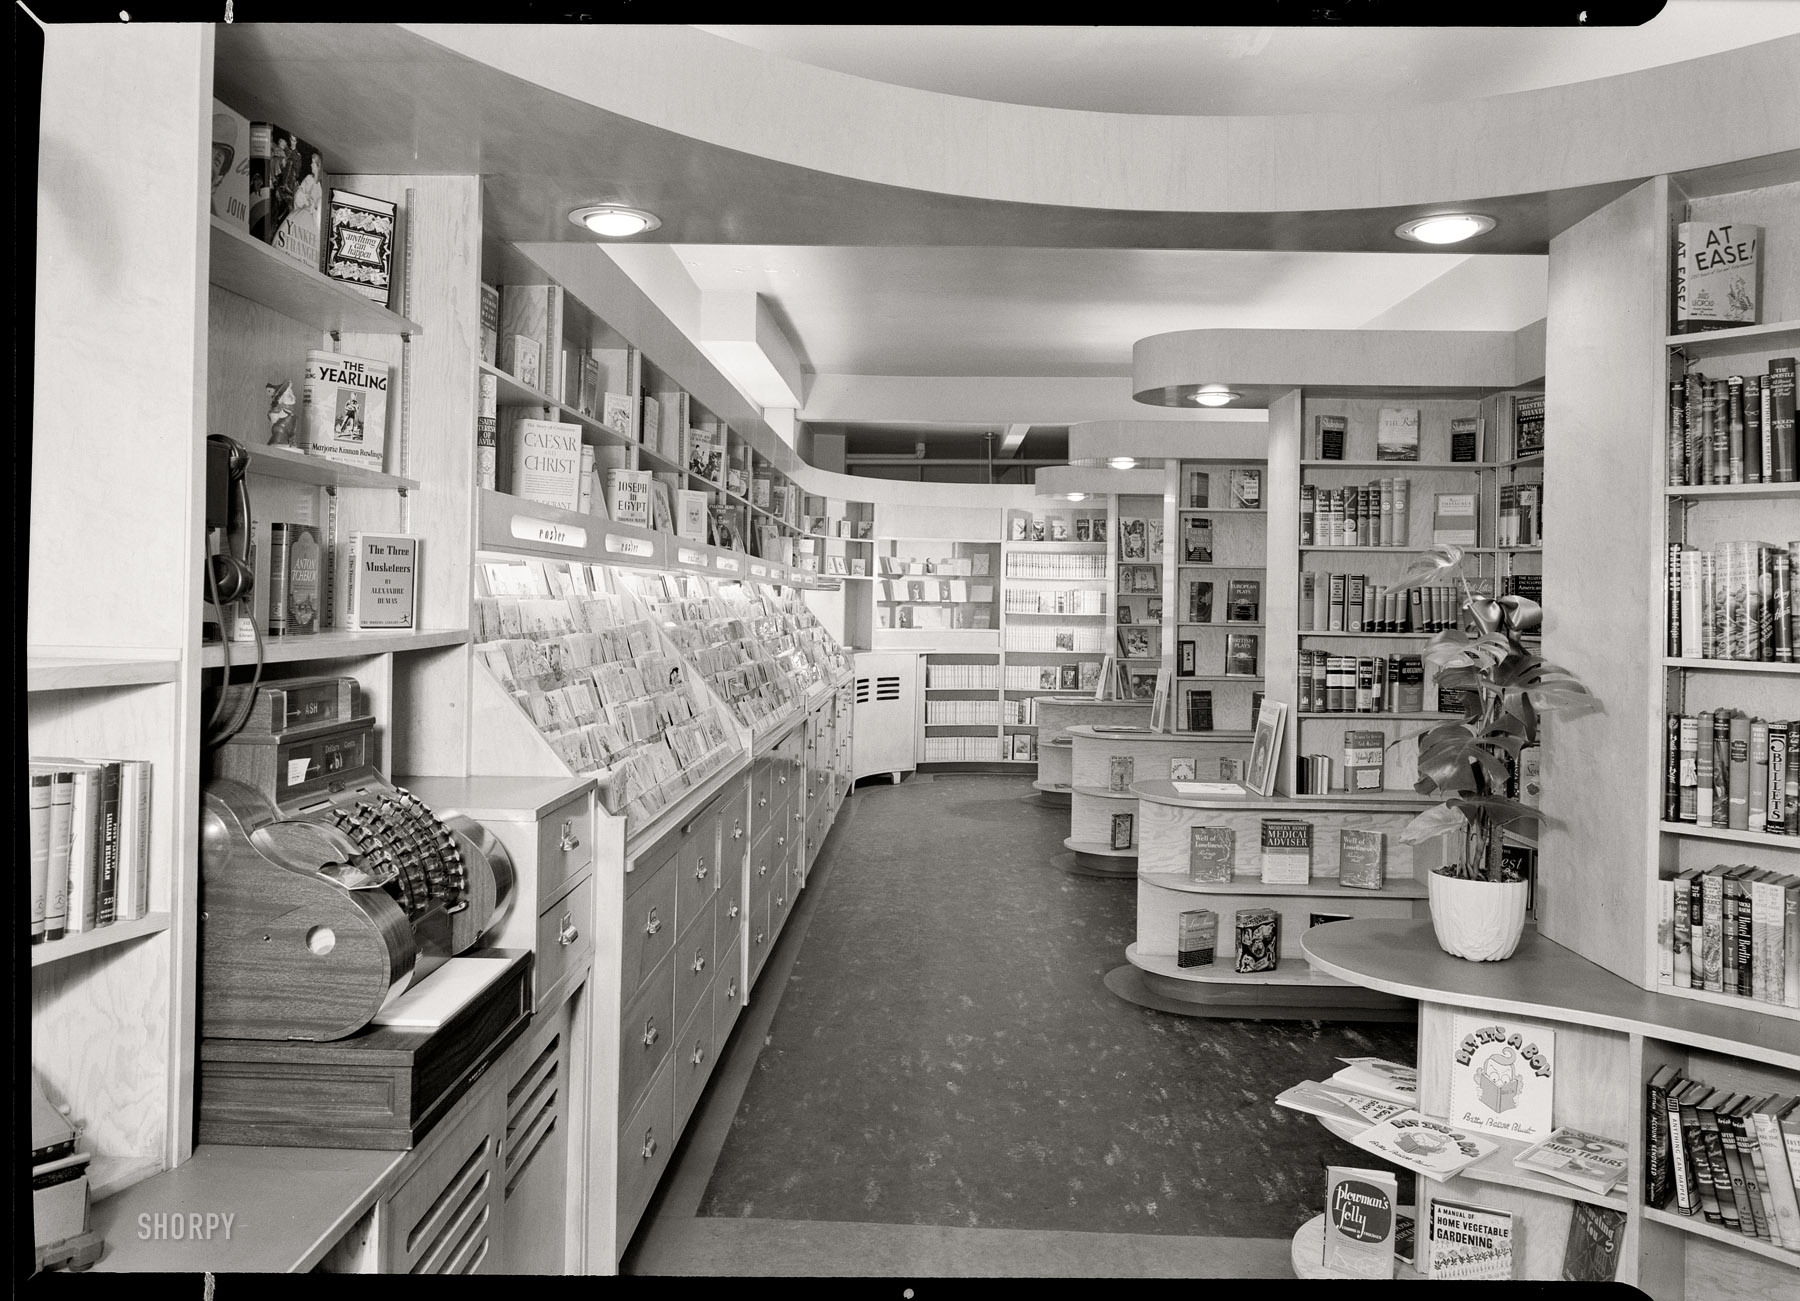 March 23, 1945. "Dover Book Shop, 2672 Broadway, New York." Among the offerings: "Dr. Quizzler's Mind Teasers." Gottscho-Schleisner photo. View full size.